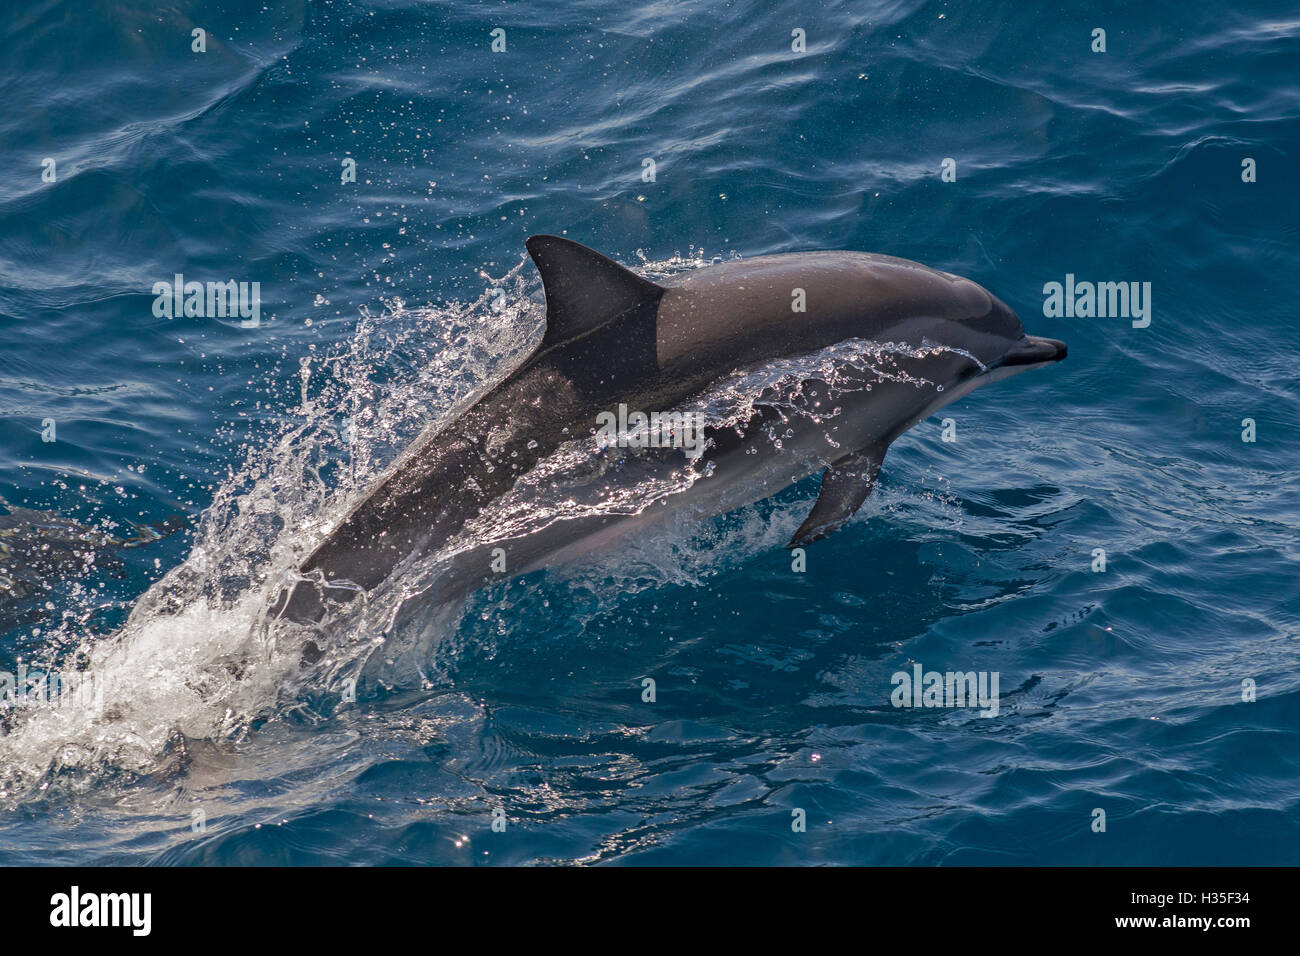 Clymene dolphin (Stenella clymene) porpoising with water trailing its flanks, offshore Senegal, West Africa, Africa Stock Photo